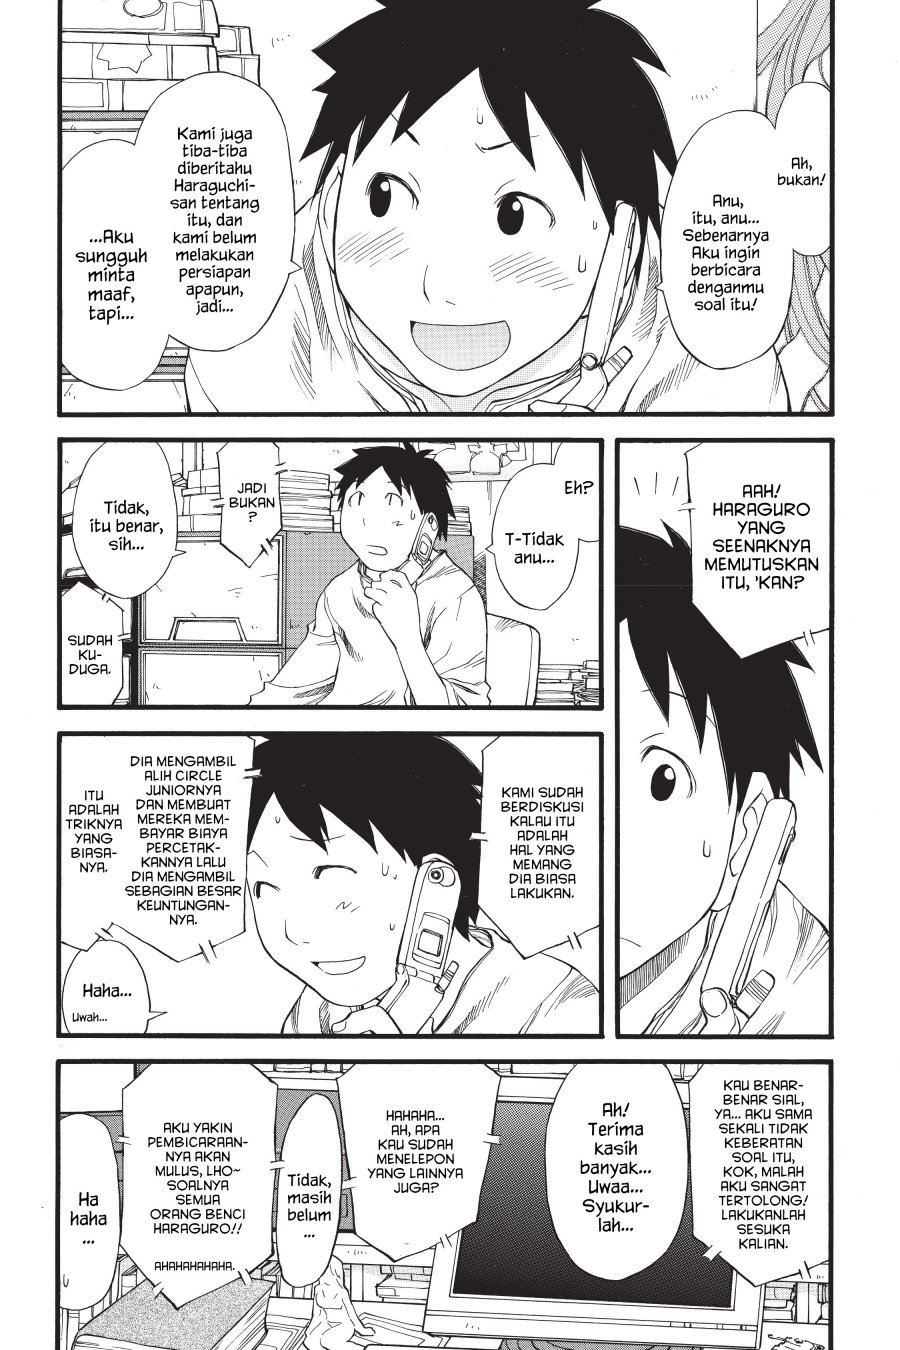 Genshiken – The Society for the Study of Modern Visual Culture Chapter 27 Image 19